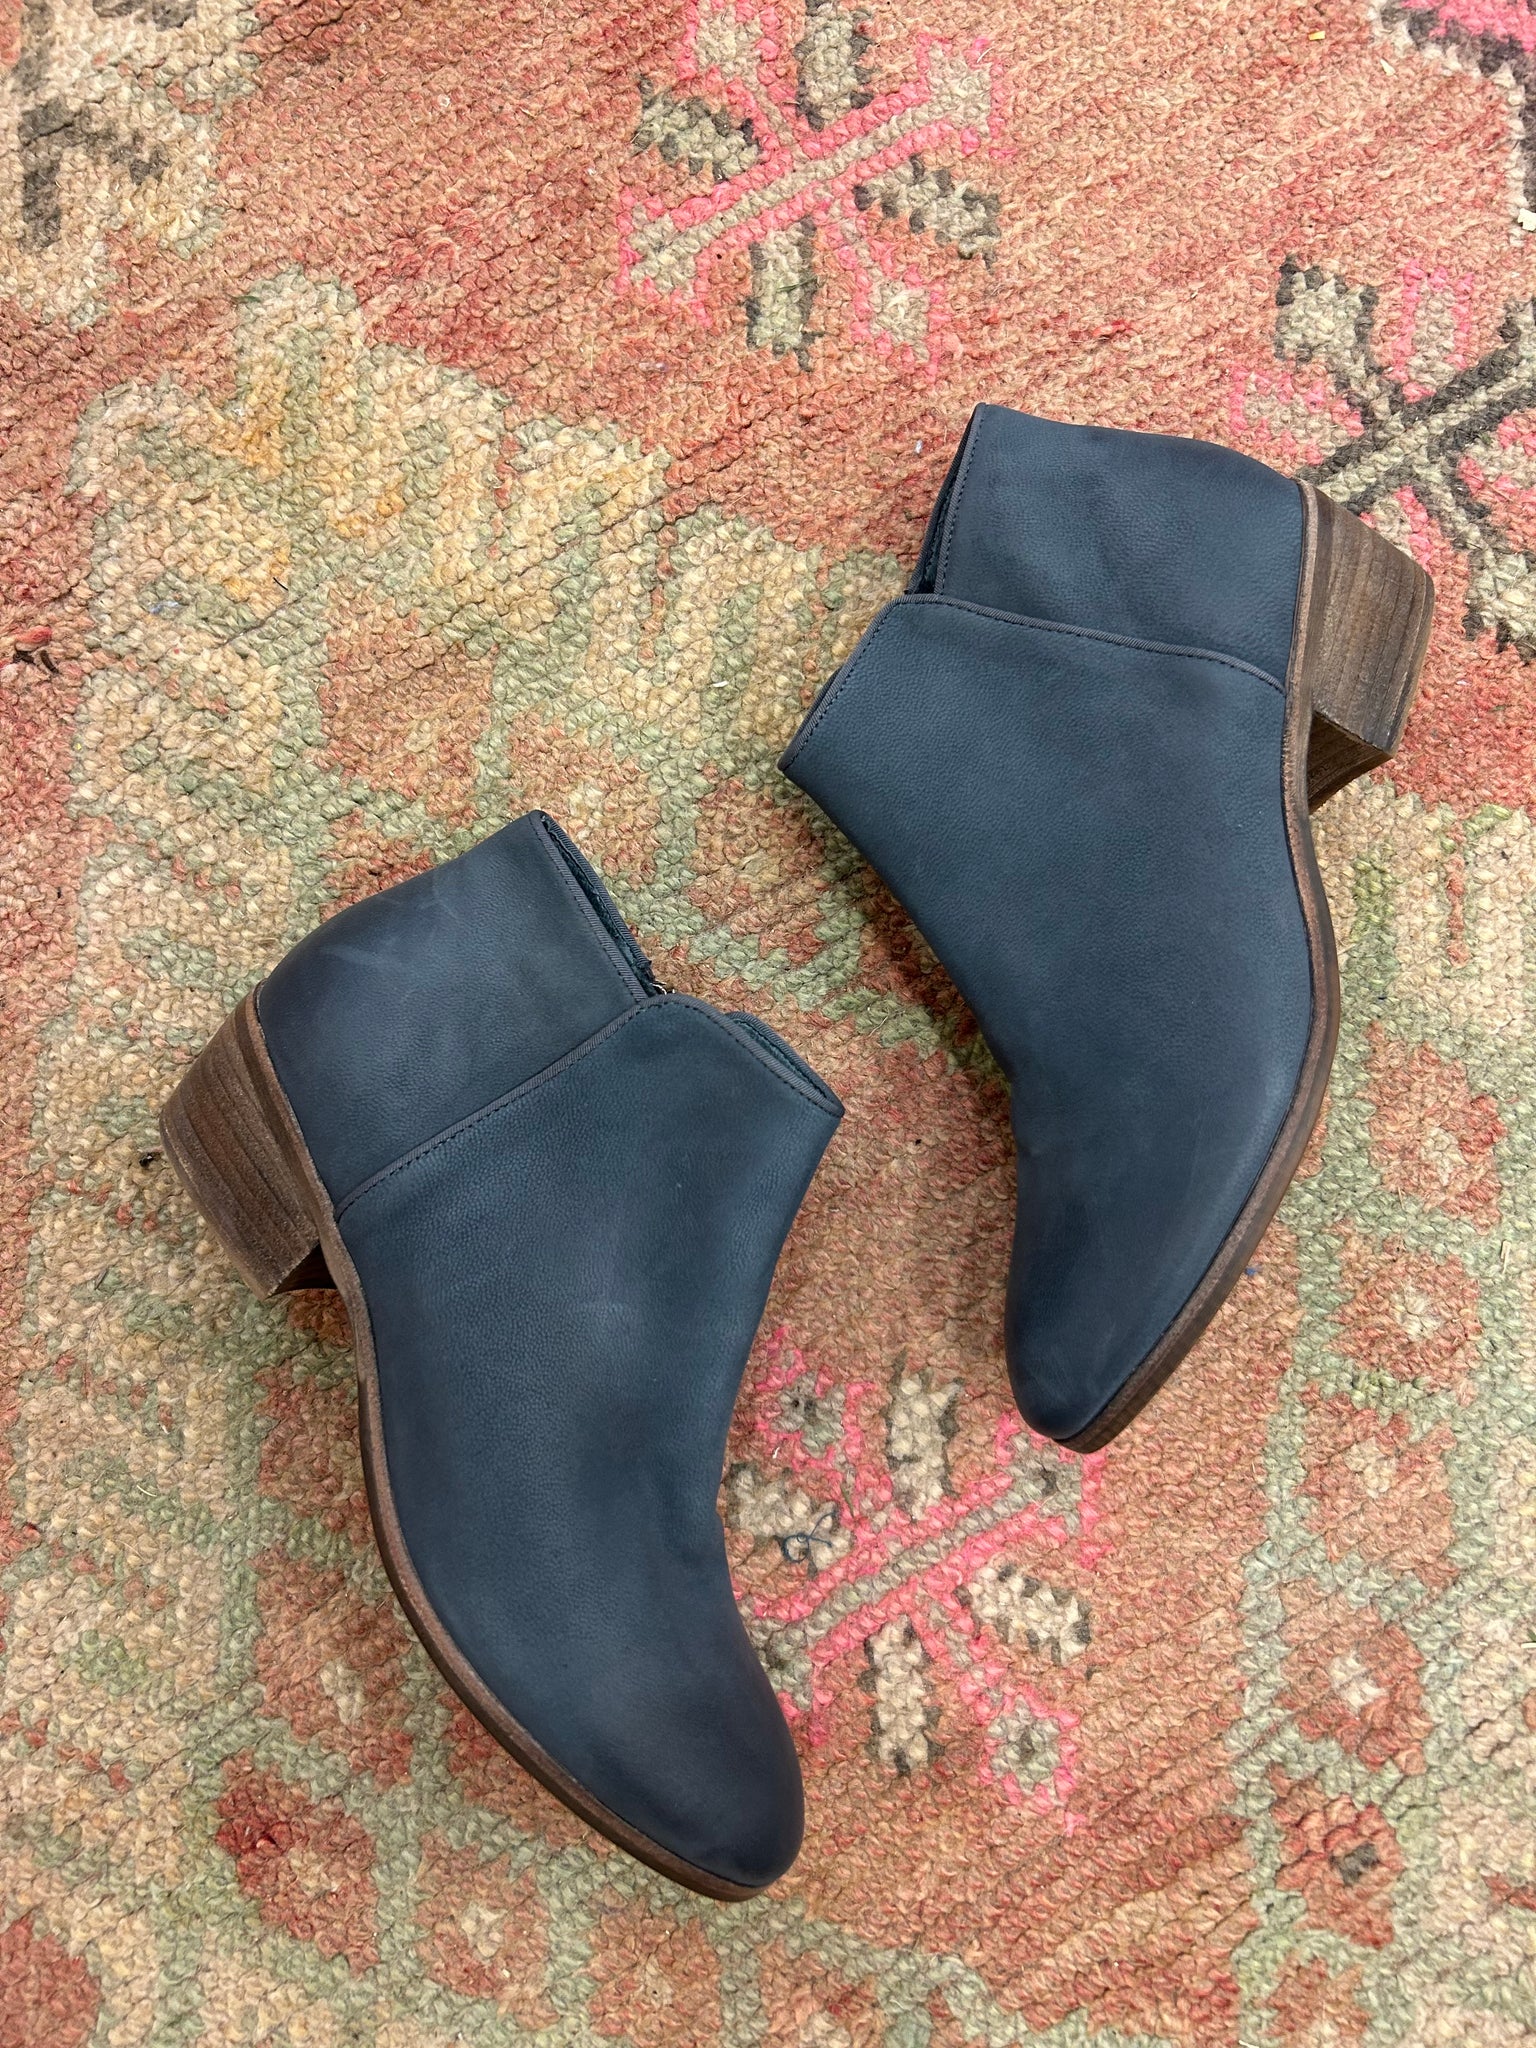 Moline Ankle Boots - Size 37